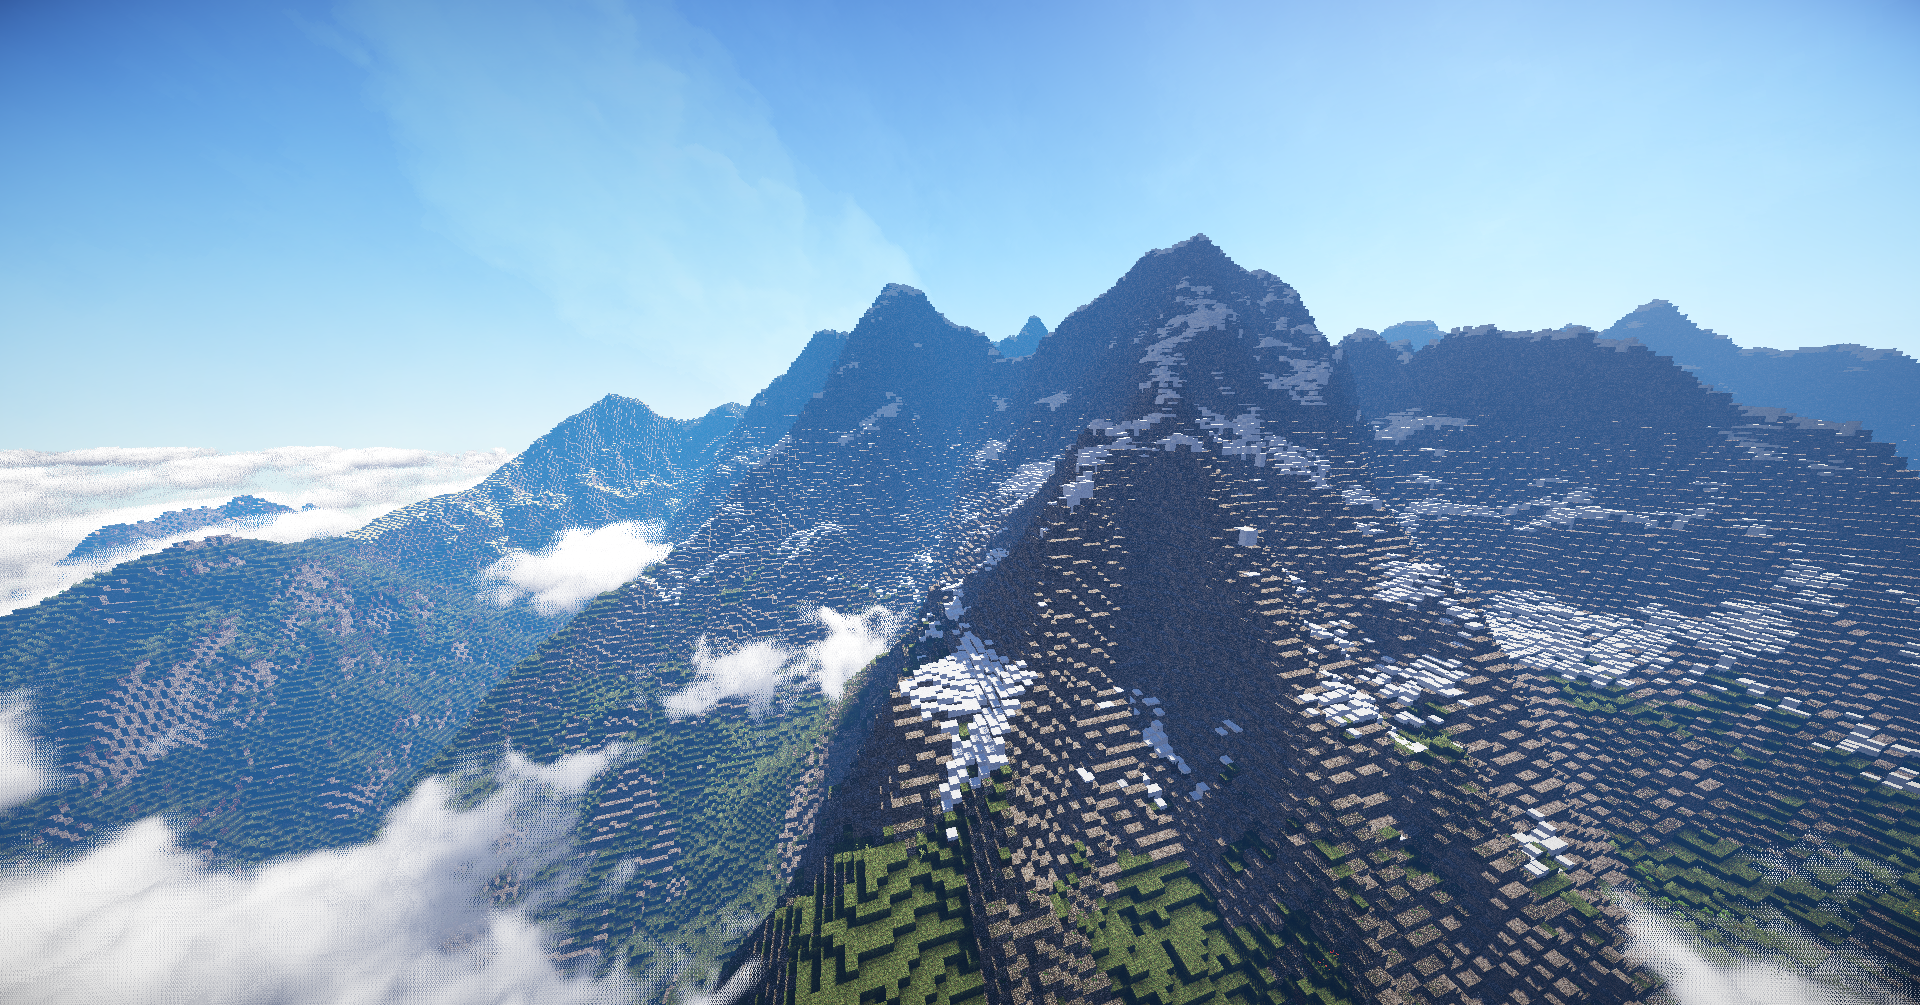 Minecraft Moutains Wallpaper Image